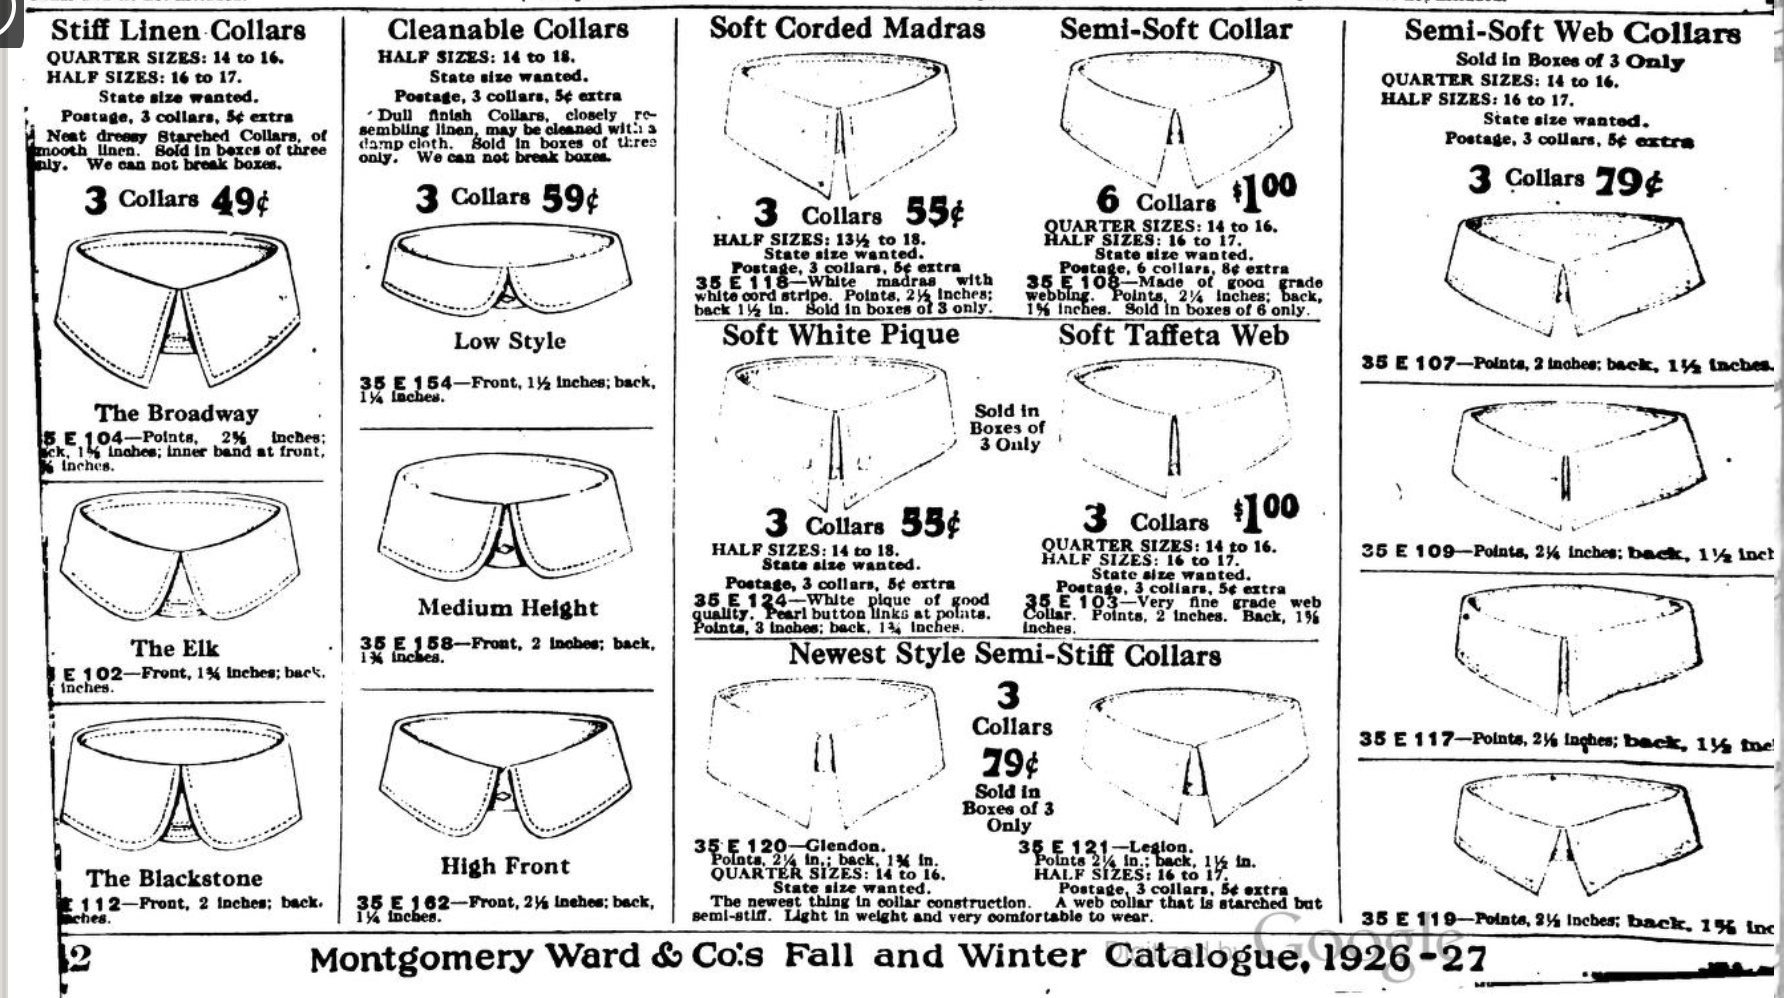 Fresh white collars for sale in the 1926 Montgomery Ward catalog.